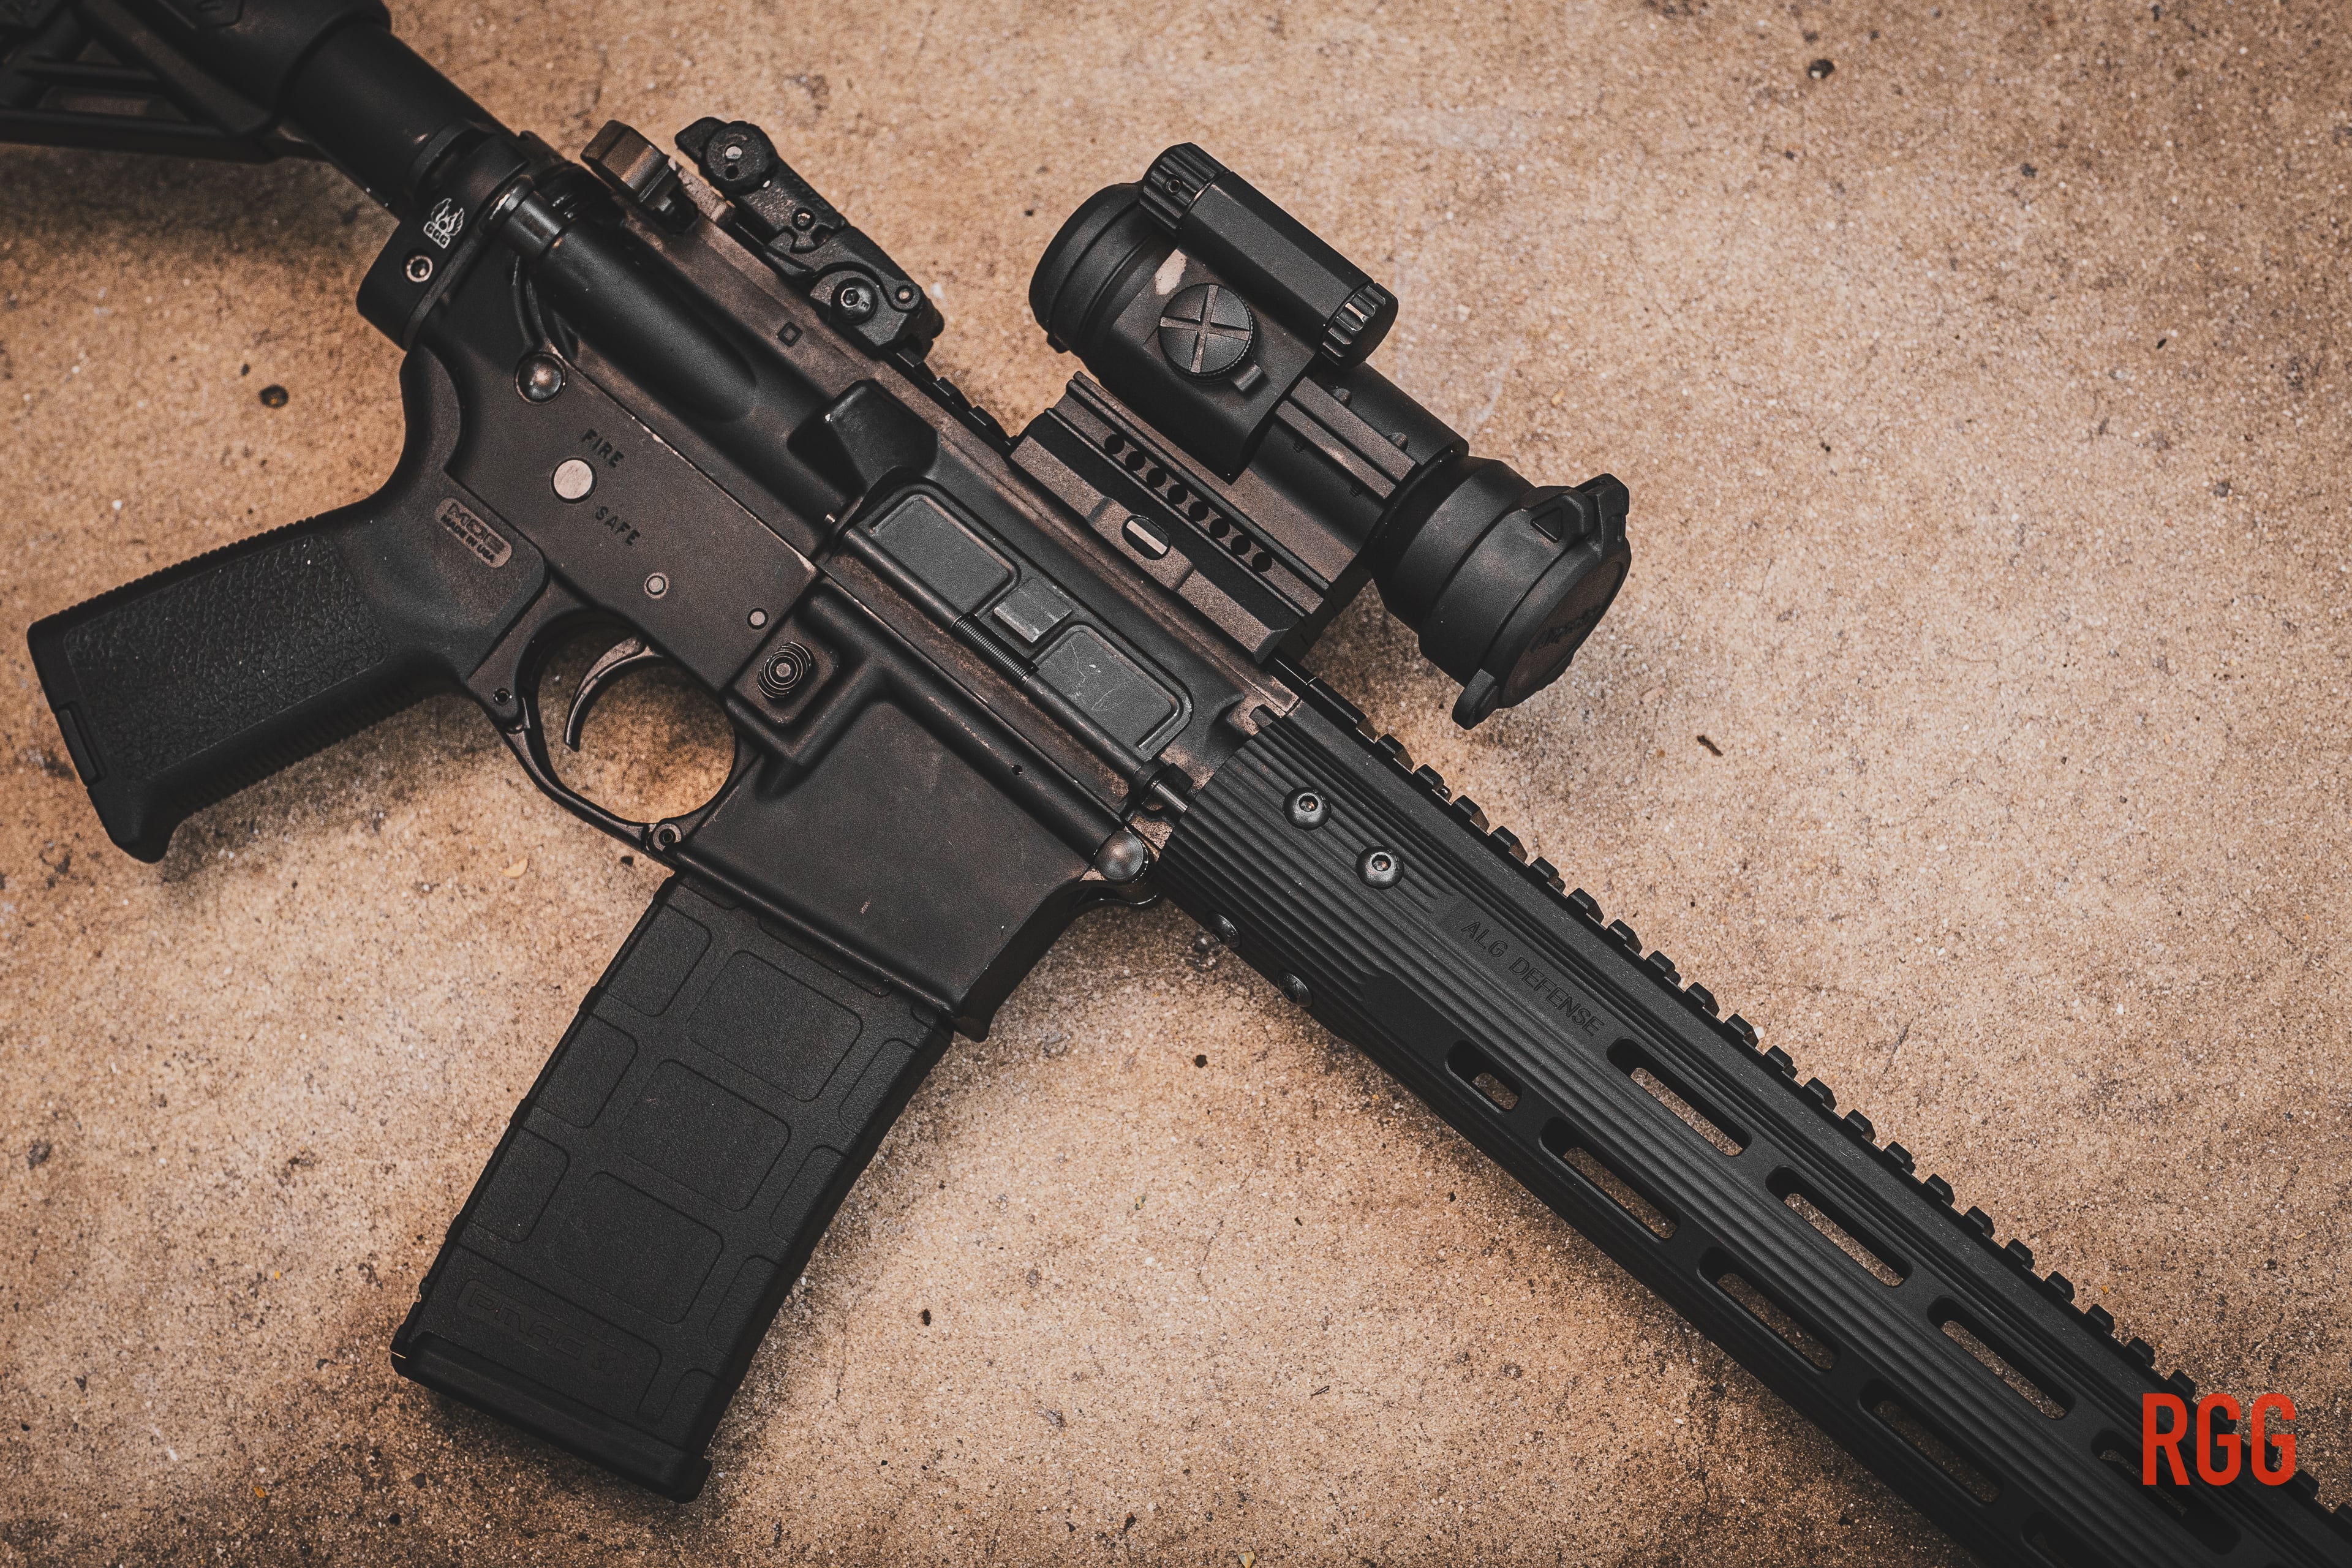 A tasteful engraving is the only branding on the EMR V3X 15 Inch Handguard.